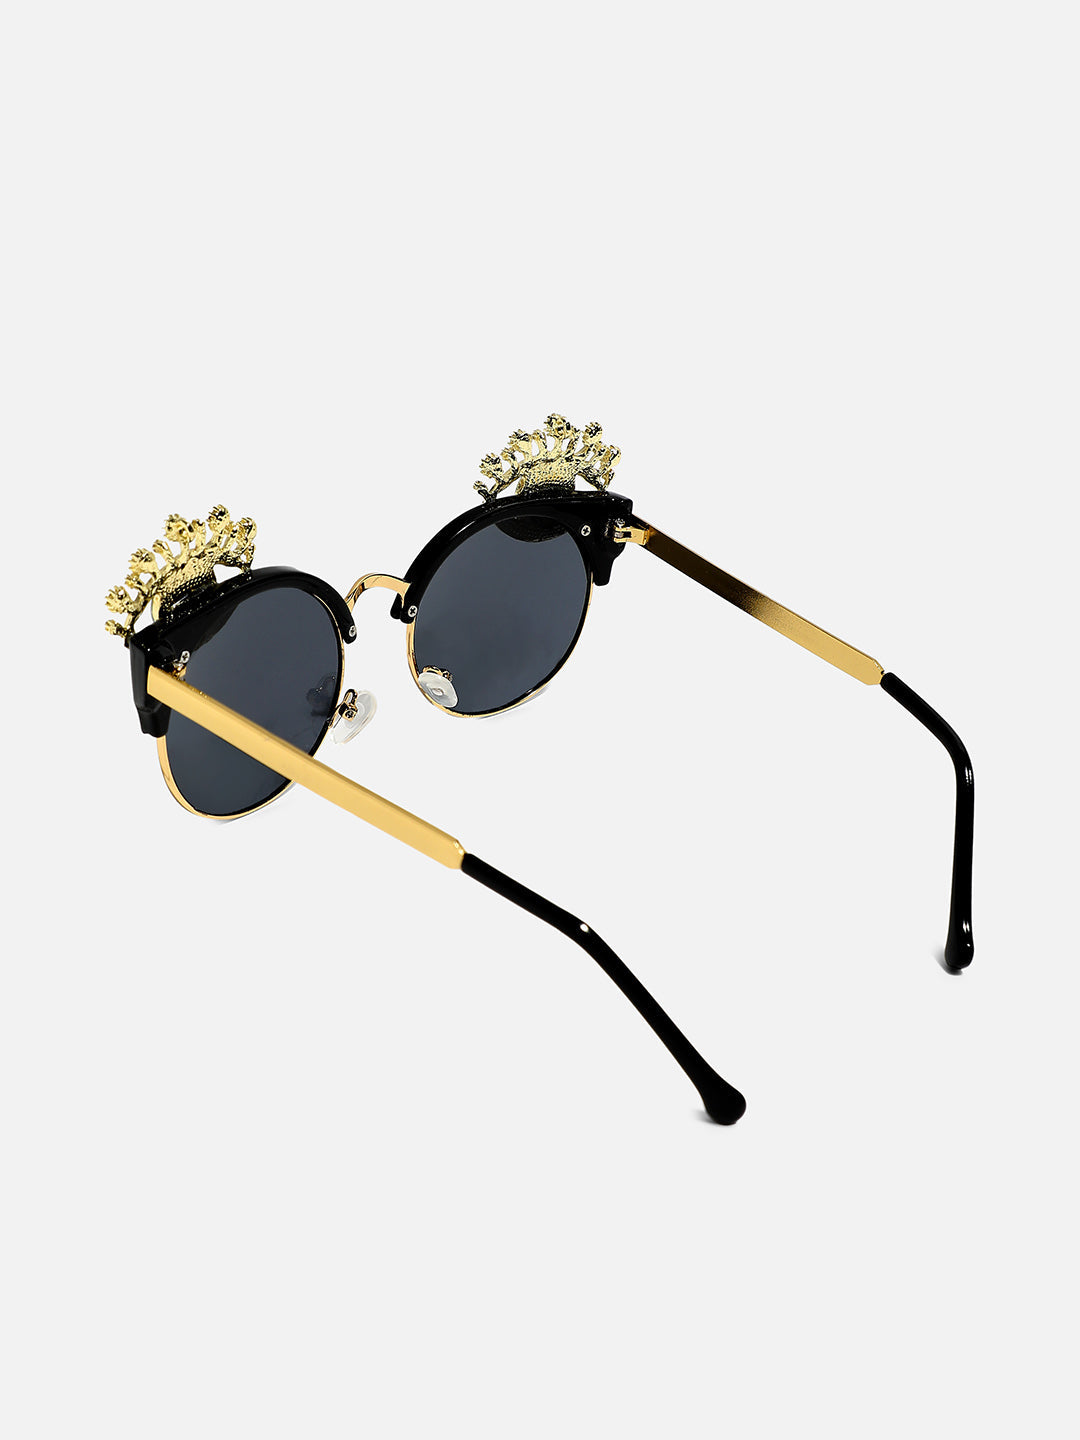 Statement Sunnies: Stand Out In Style